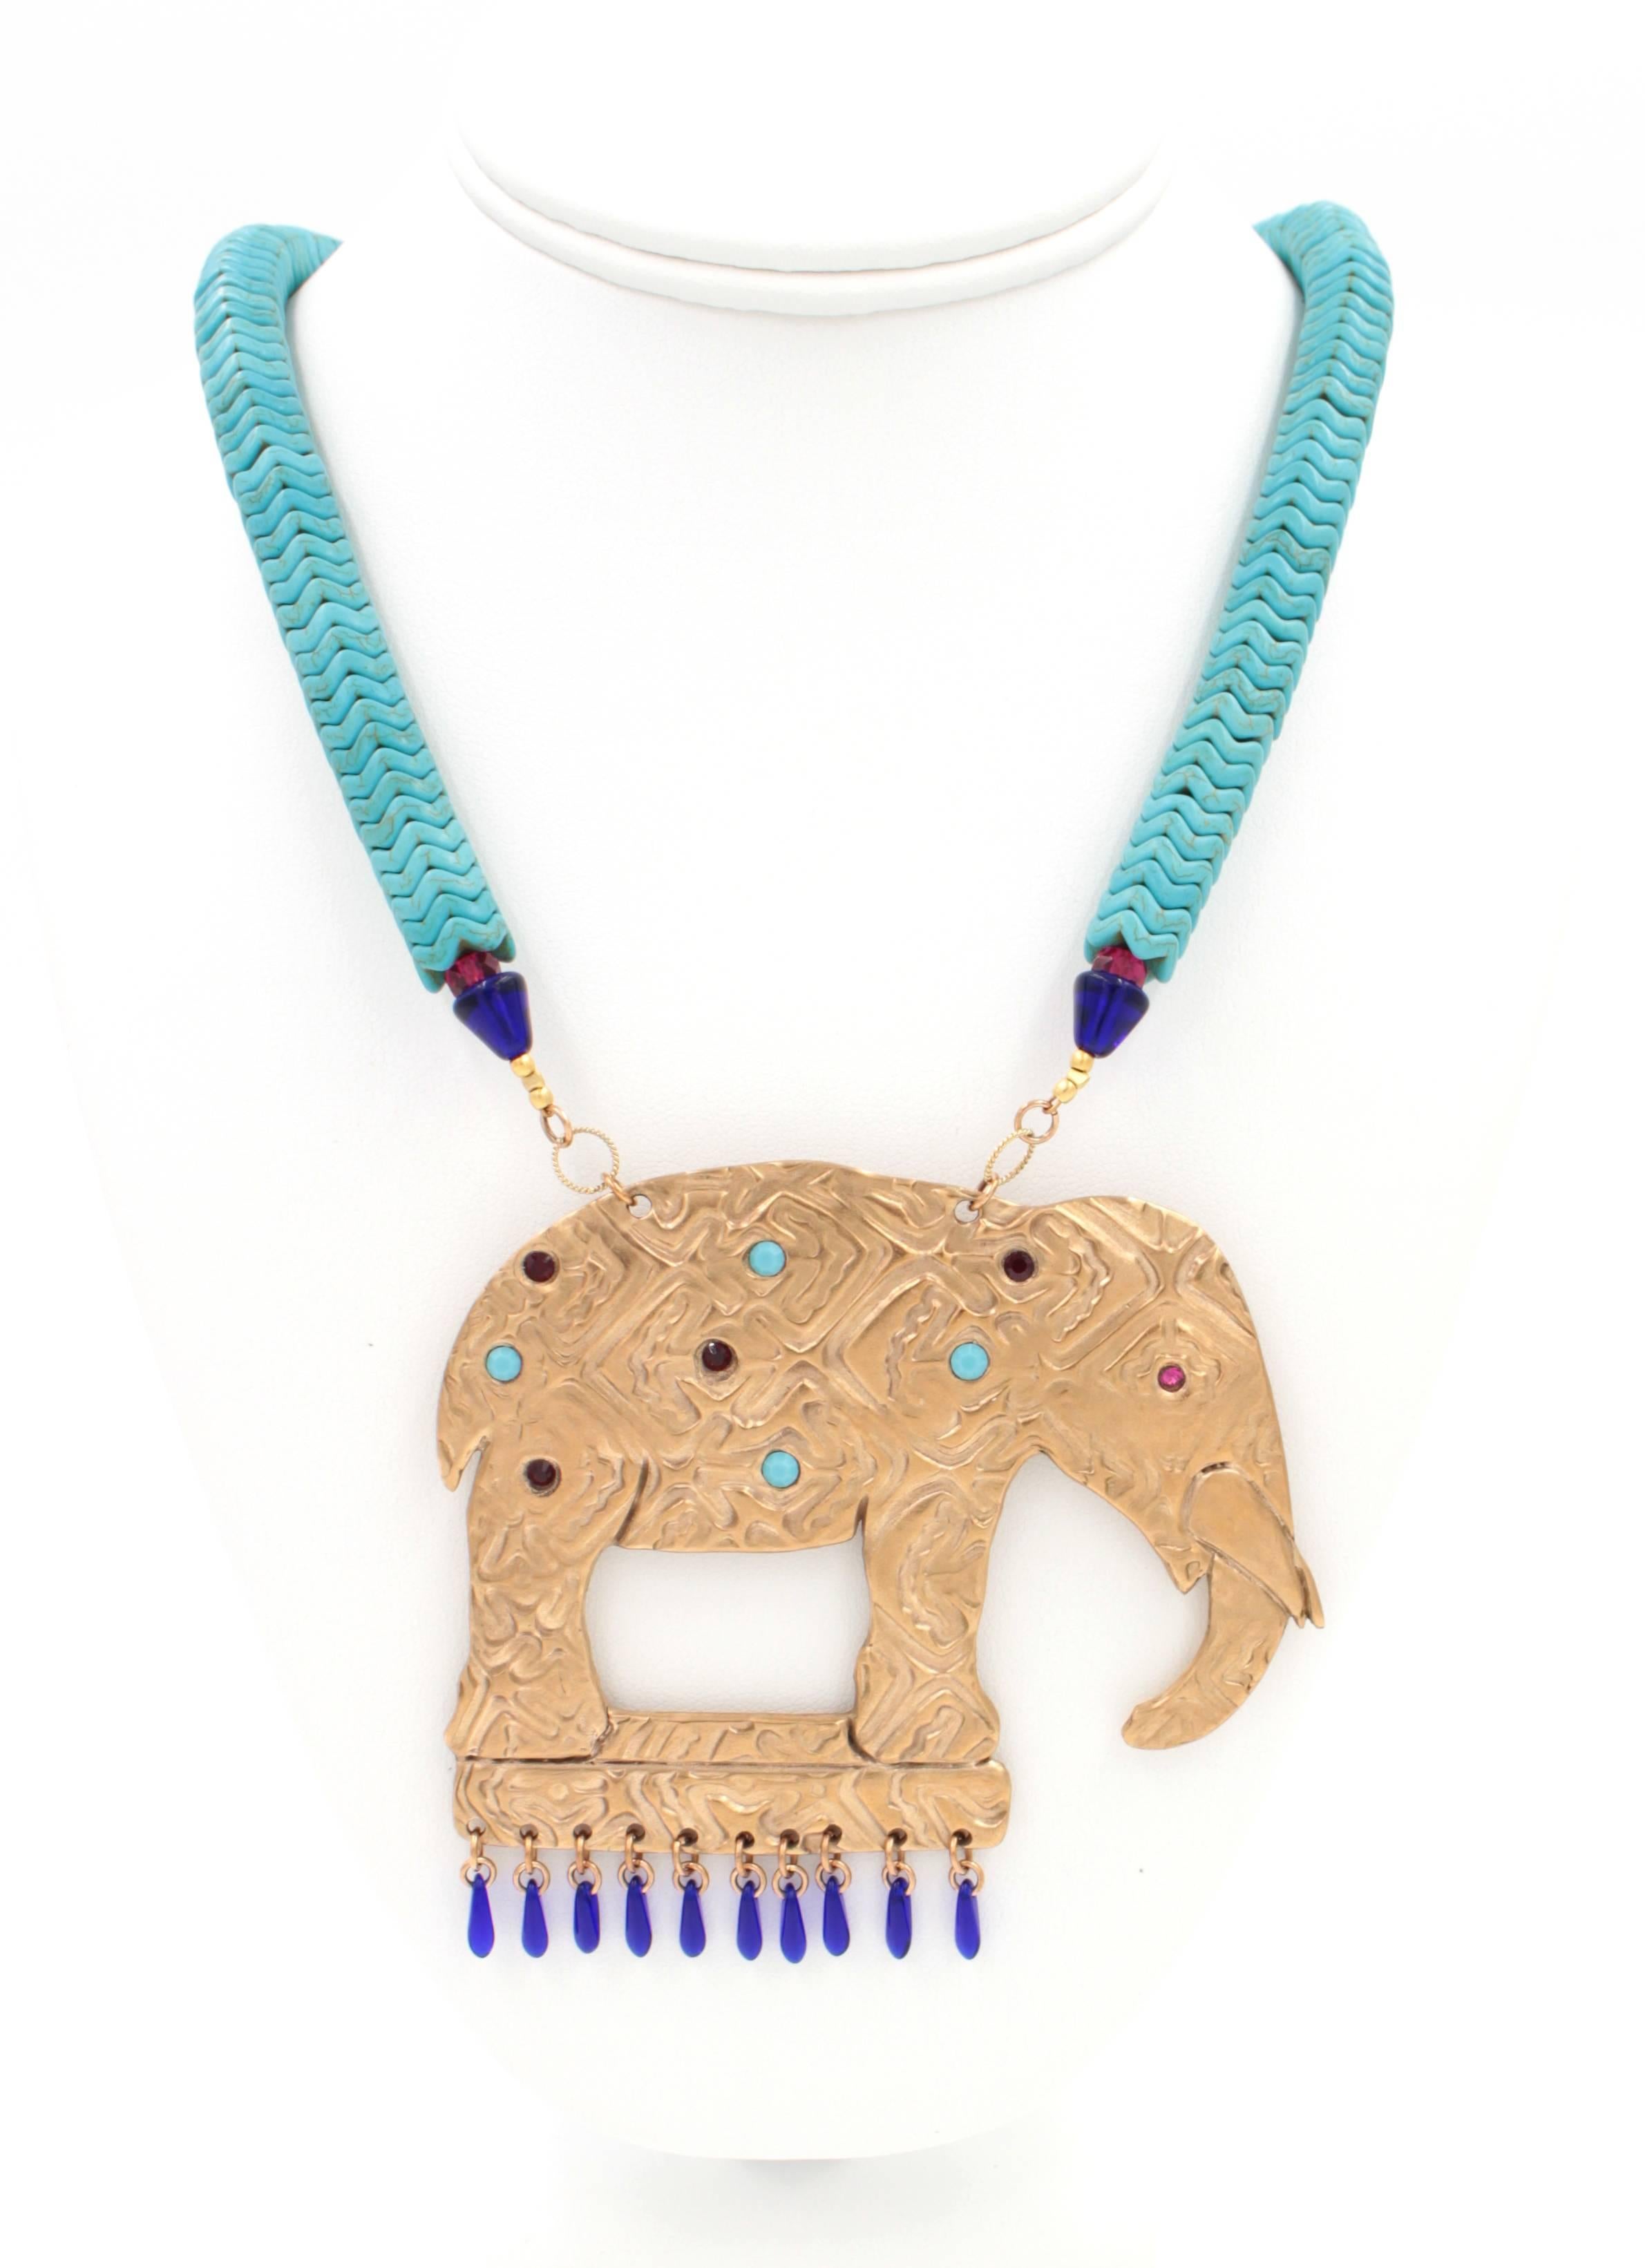 The Elephant Necklace features a stunning array of red and vintage turquoise Swarovski Crystals set in Bronze with cobalt blue glass bead fringe. The necklace is made of brilliant turquoise beads.